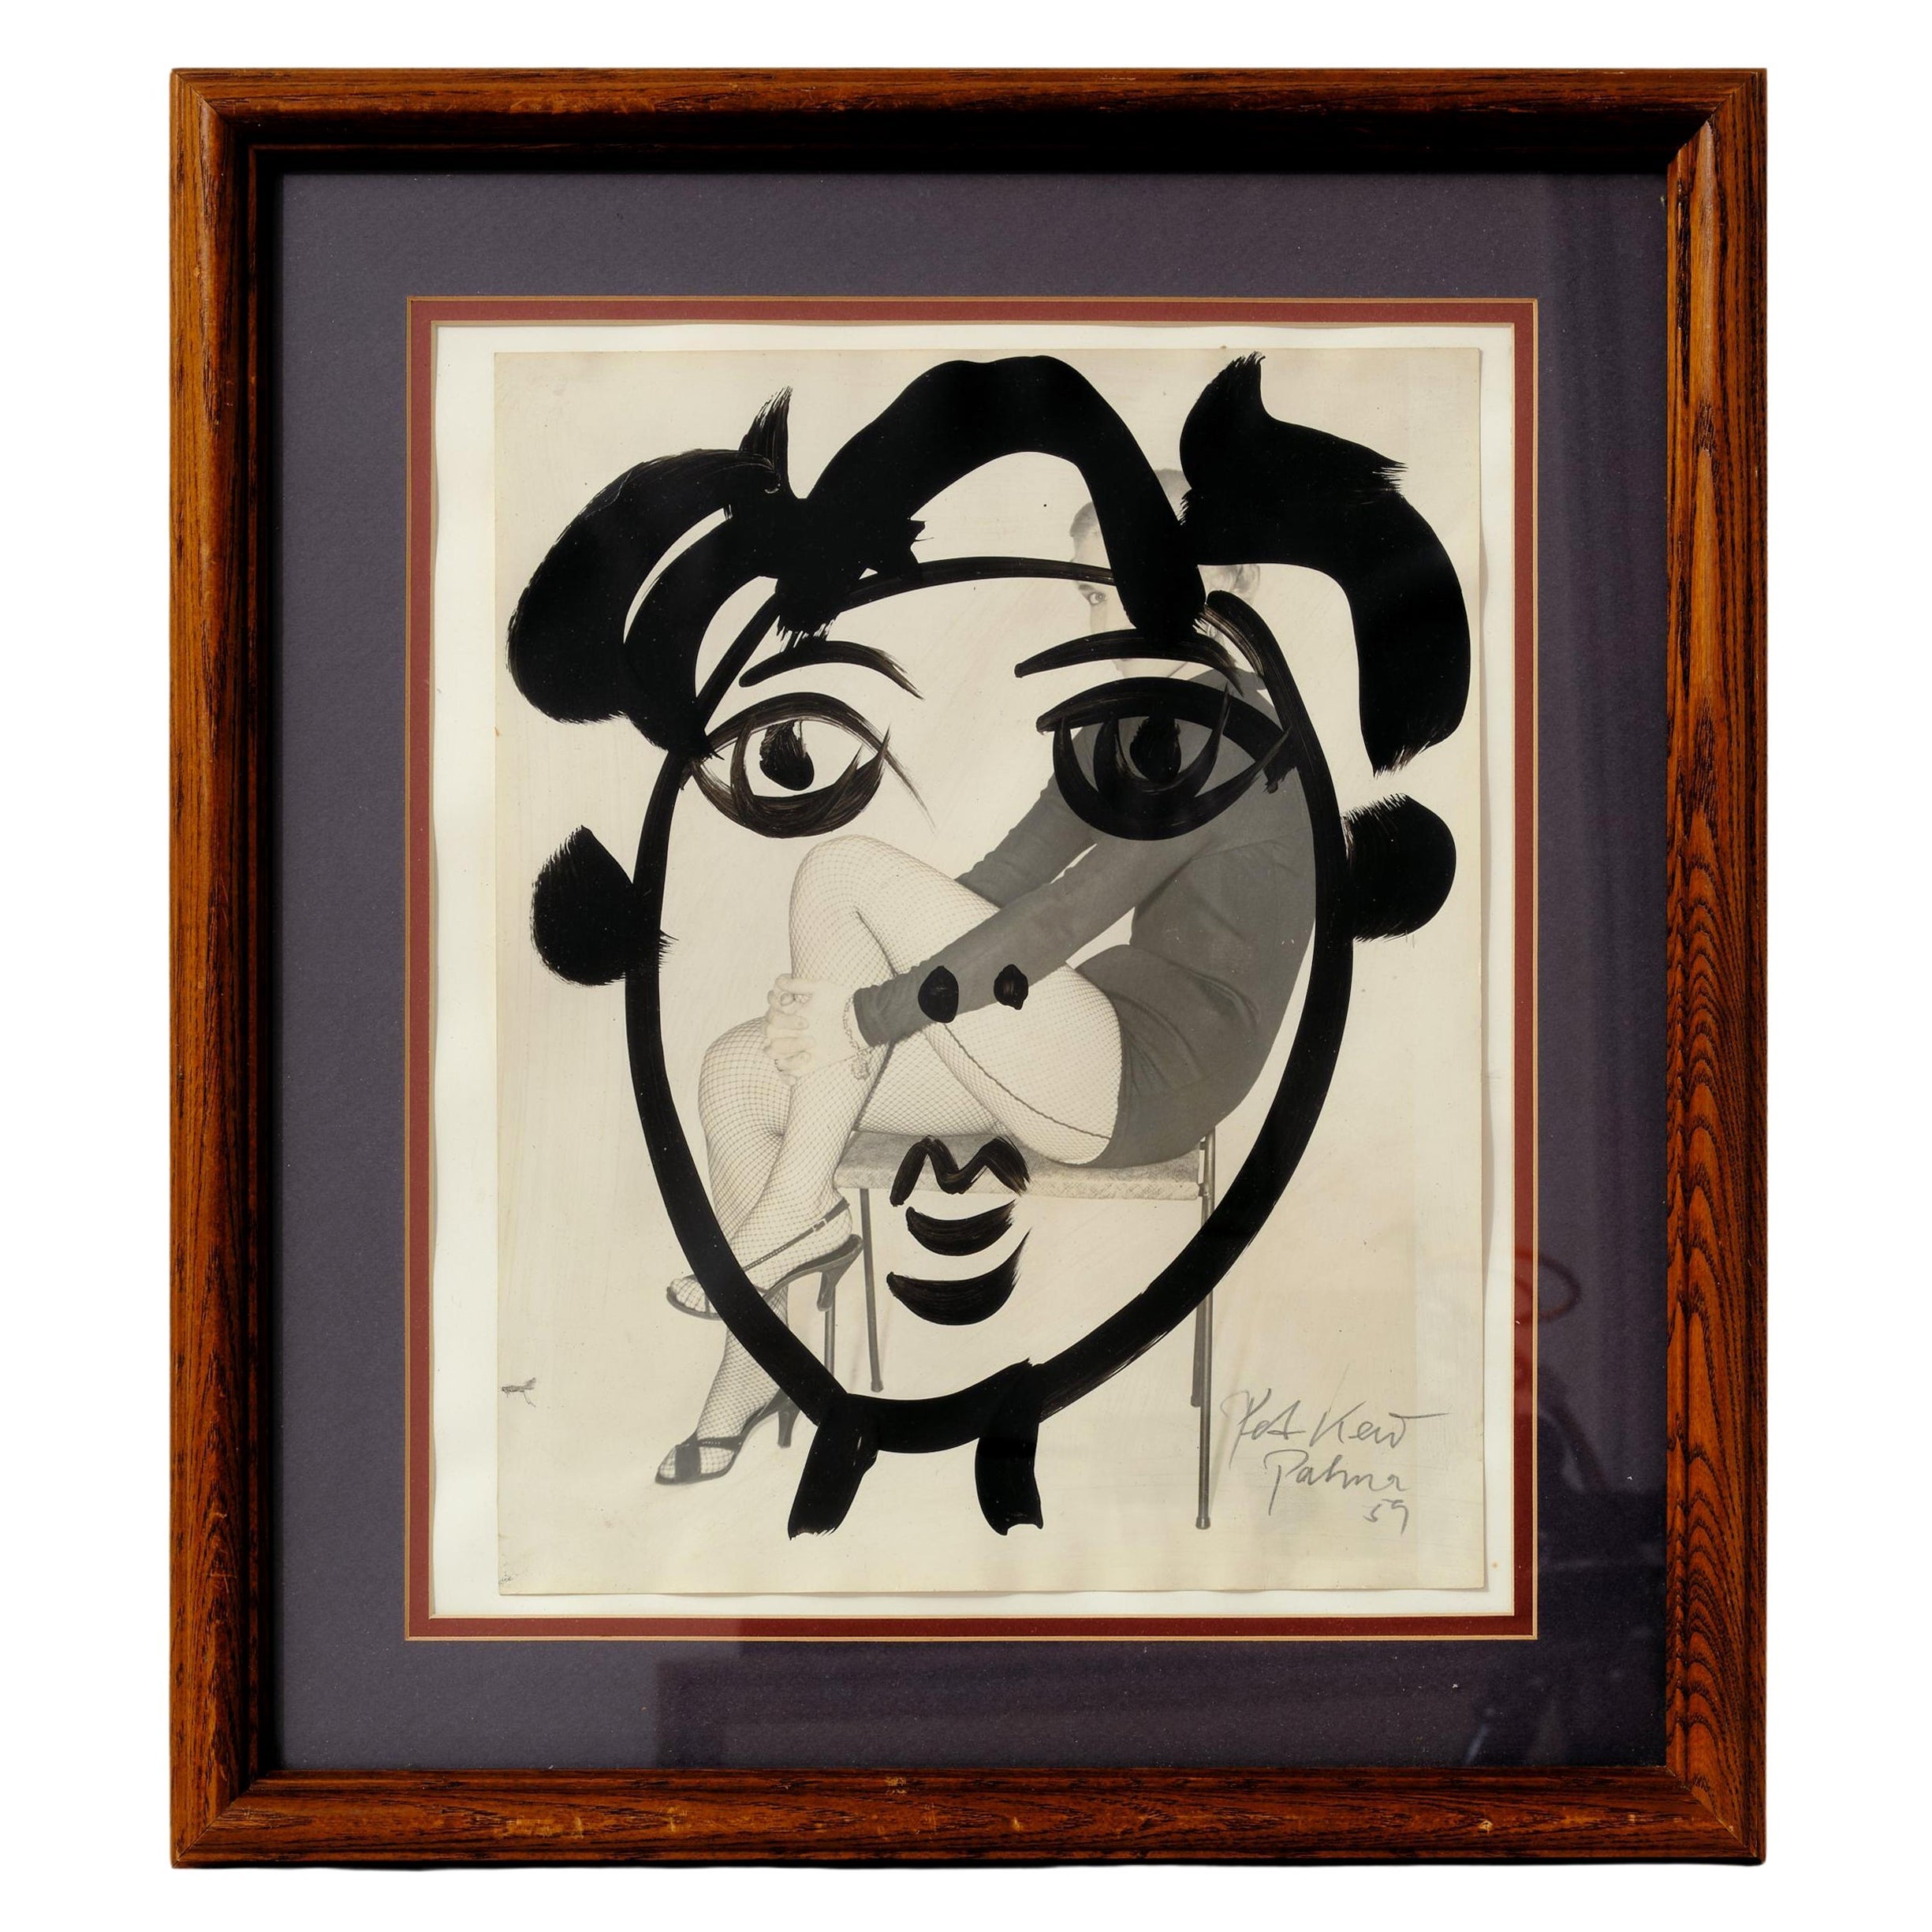 Painting by Peter Keil, Framed Face with Fashion Lady in the Back Ground, C 1959